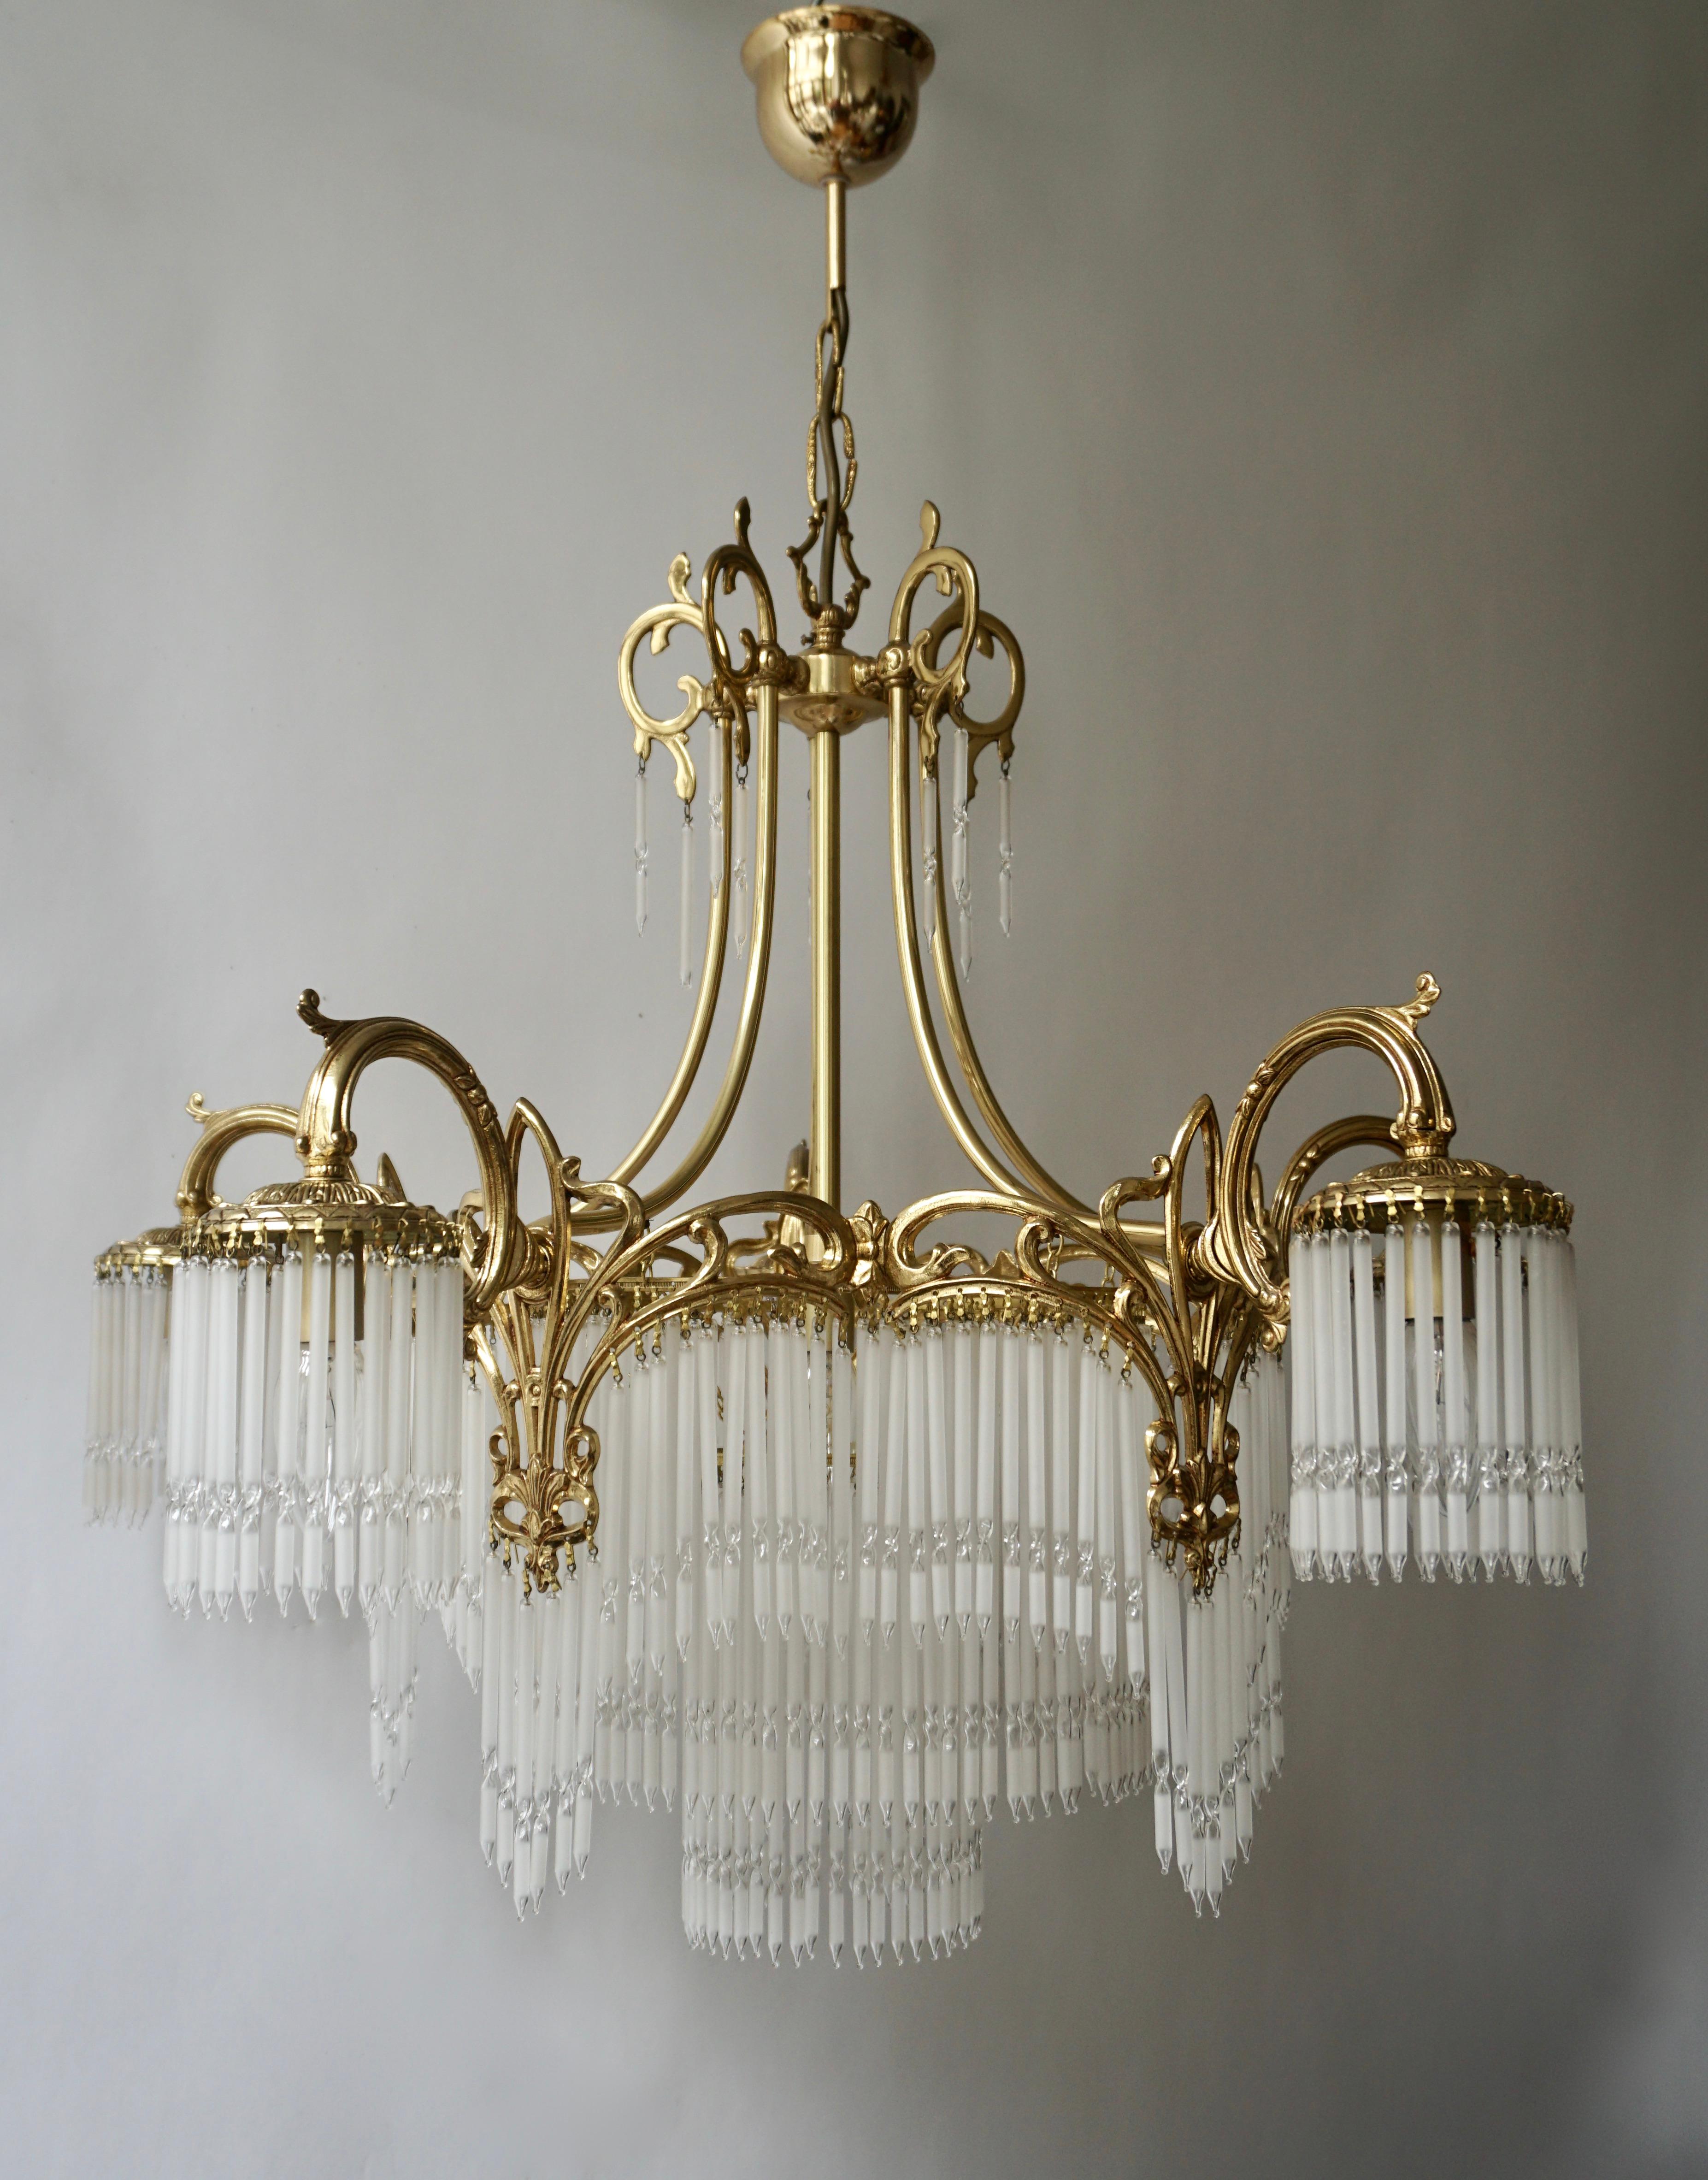 Hollywood Regency Large French Art Nouveau & Art Deco Brass and Glass Rods Chandelier